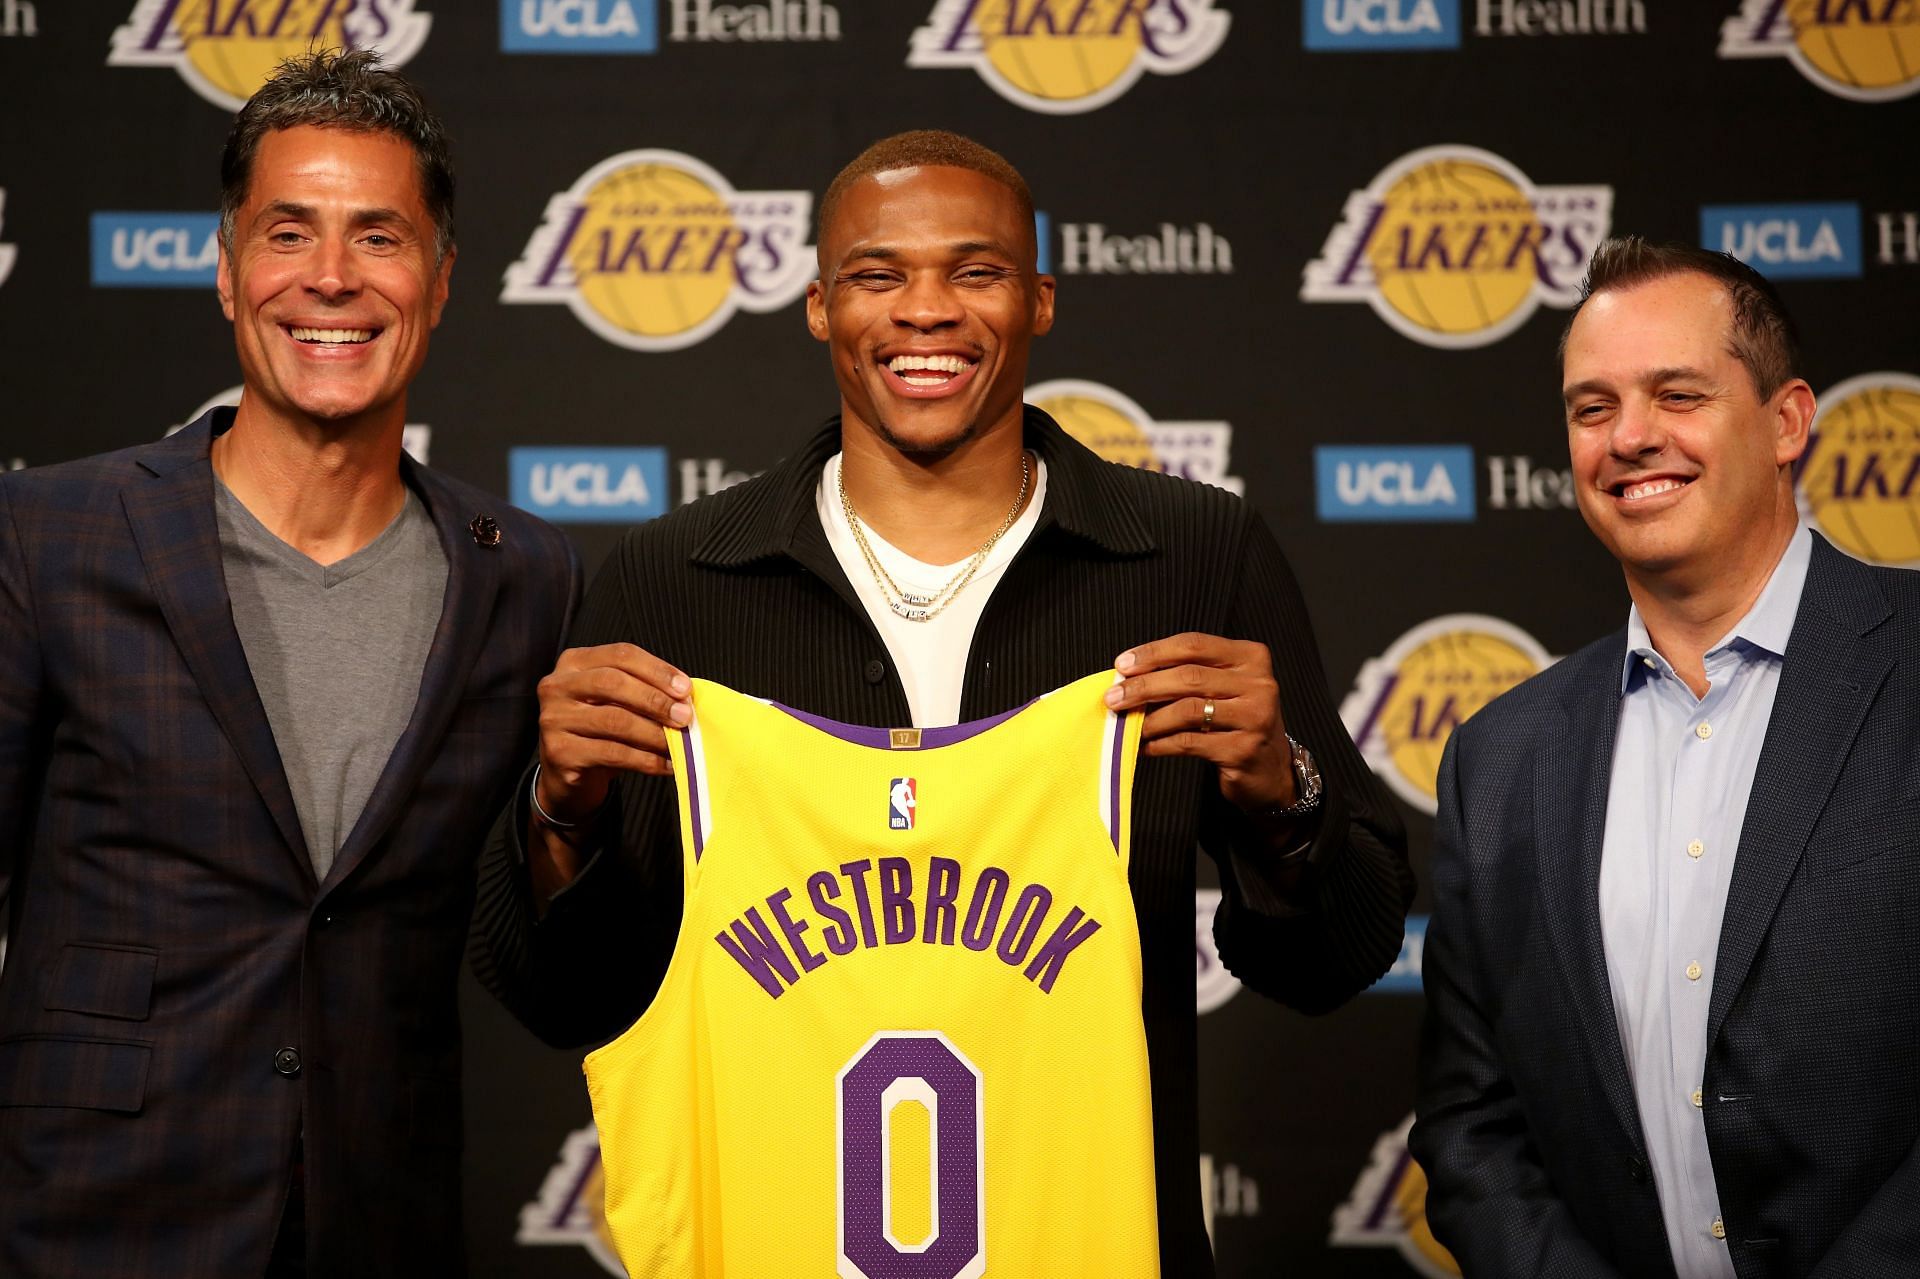 General manager Rob Pelinka, Russell Westbrook #0 and head coach Frank Vogel of the Los Angeles Lakers pose for a picture during a press conference at Staples Center on August 10, 2021 in Los Angeles, California.